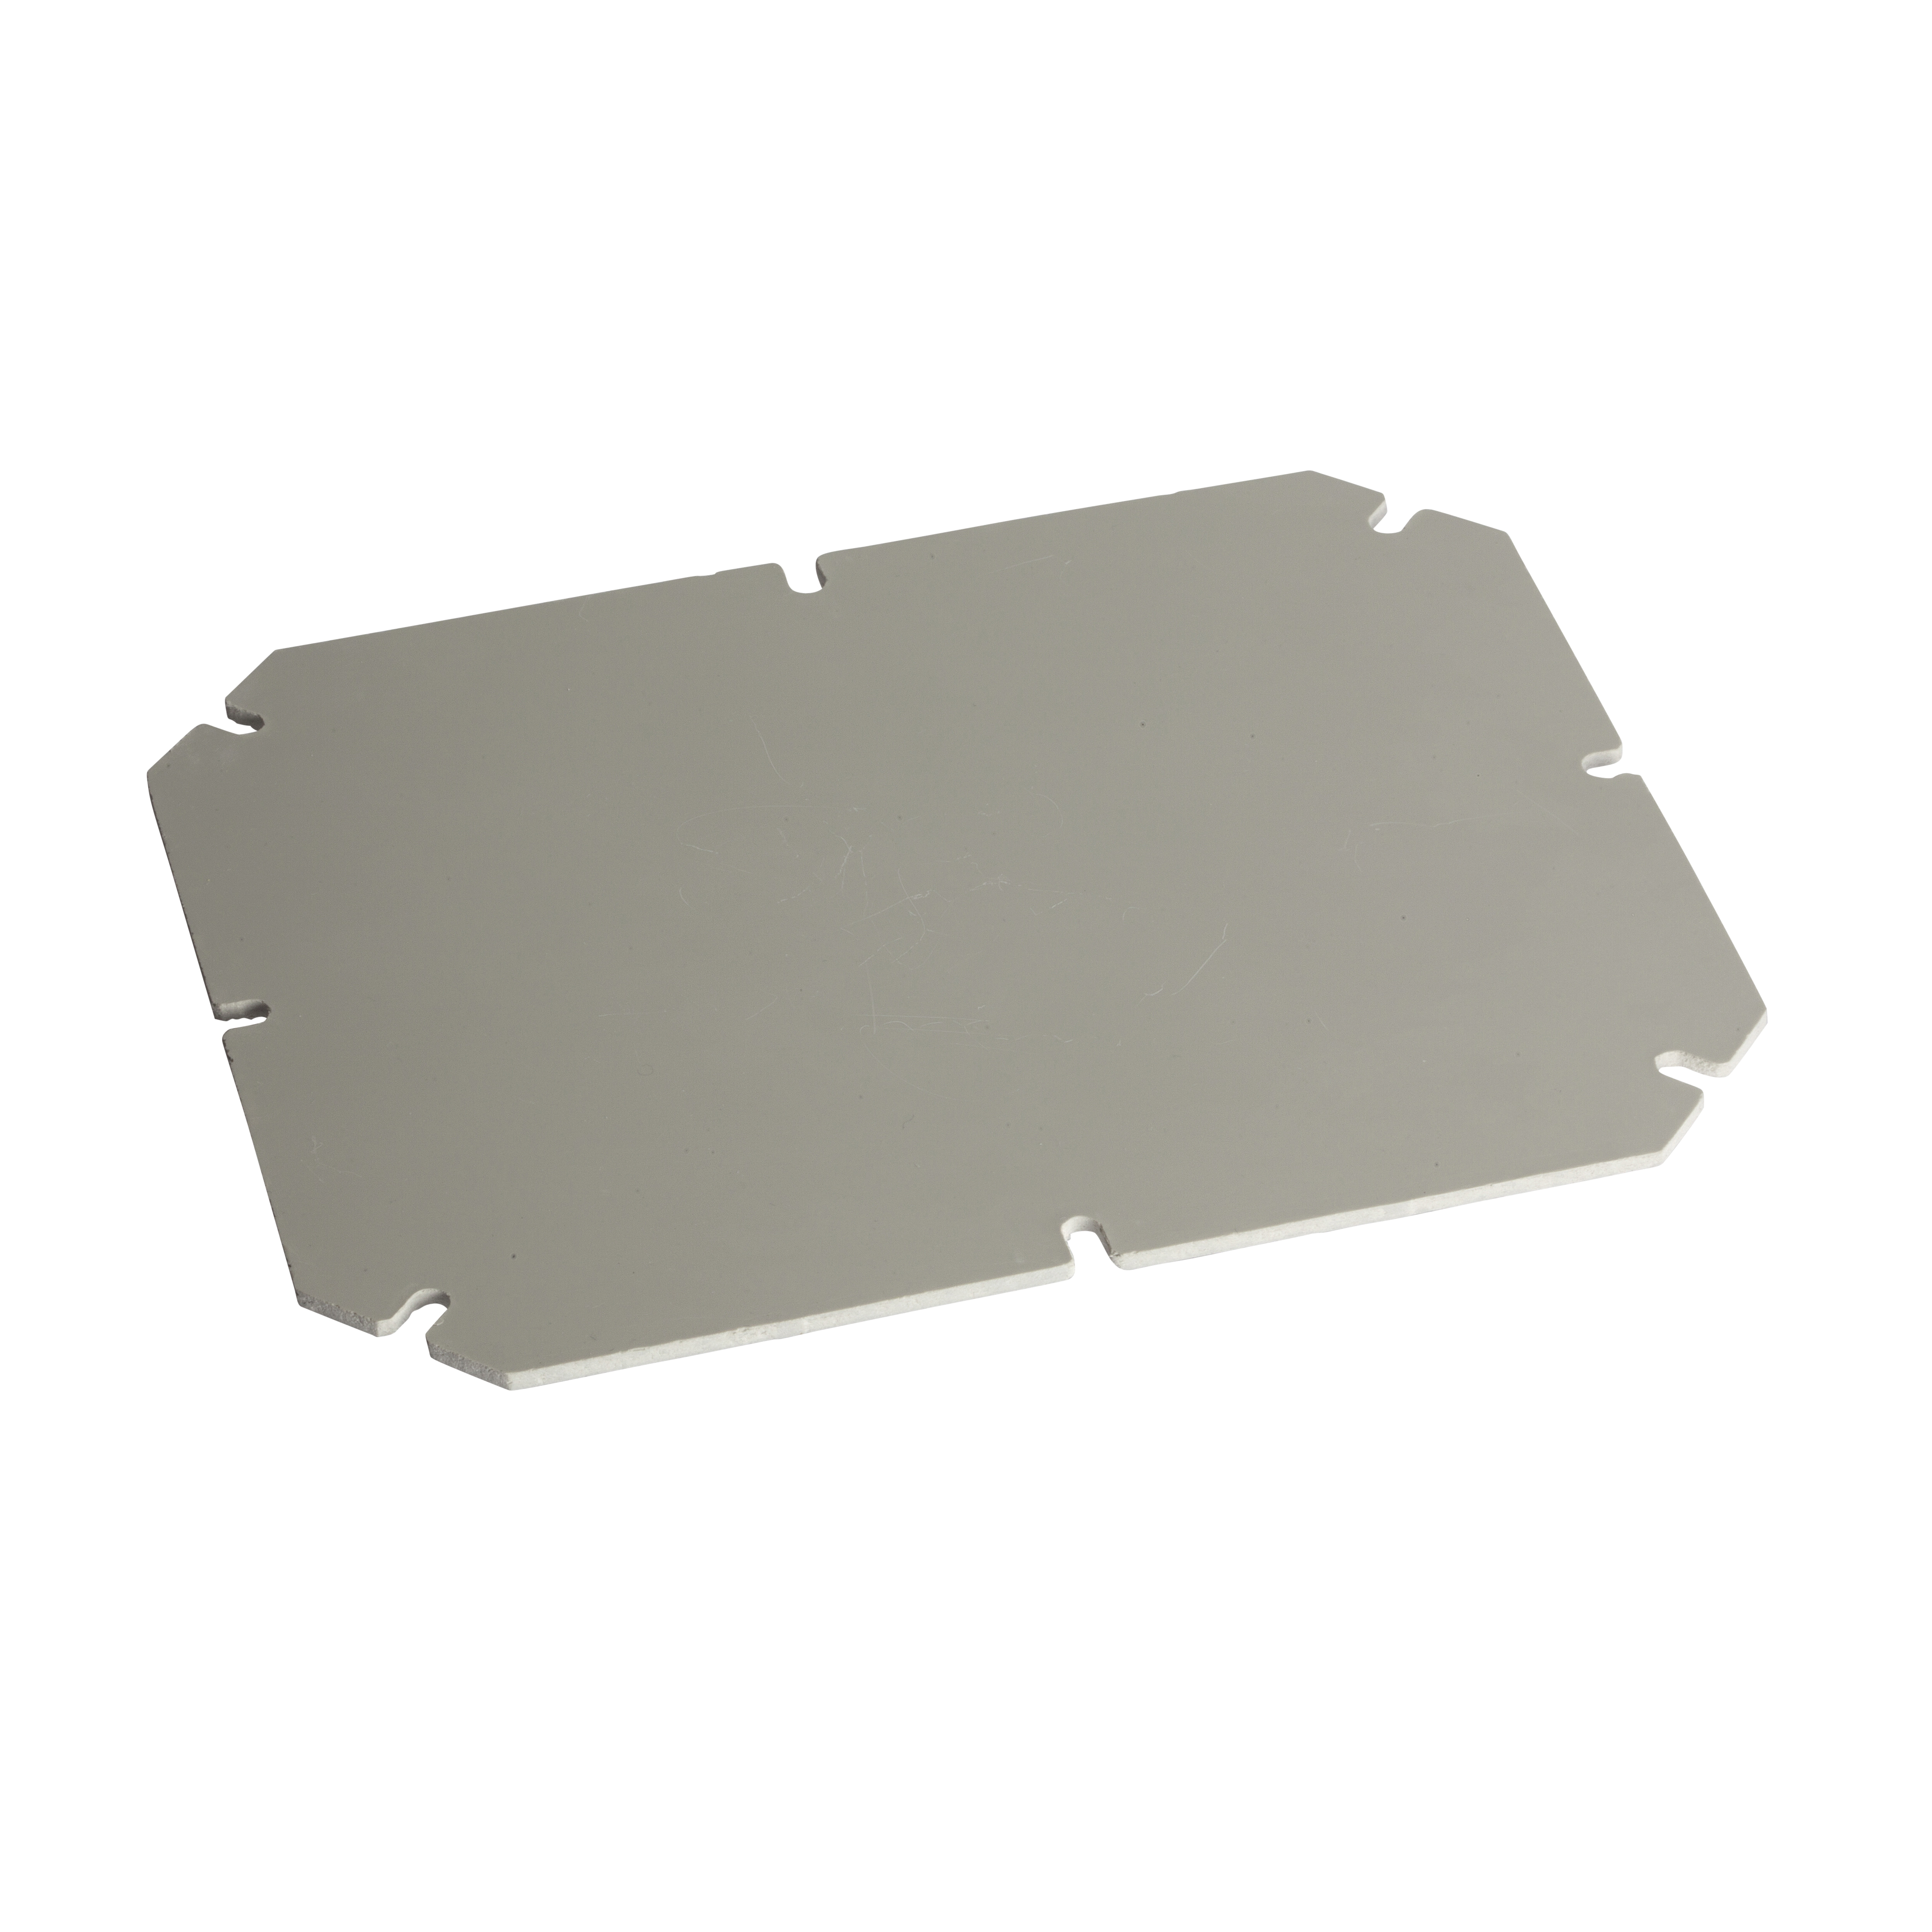 Steel mounting plate 241x192